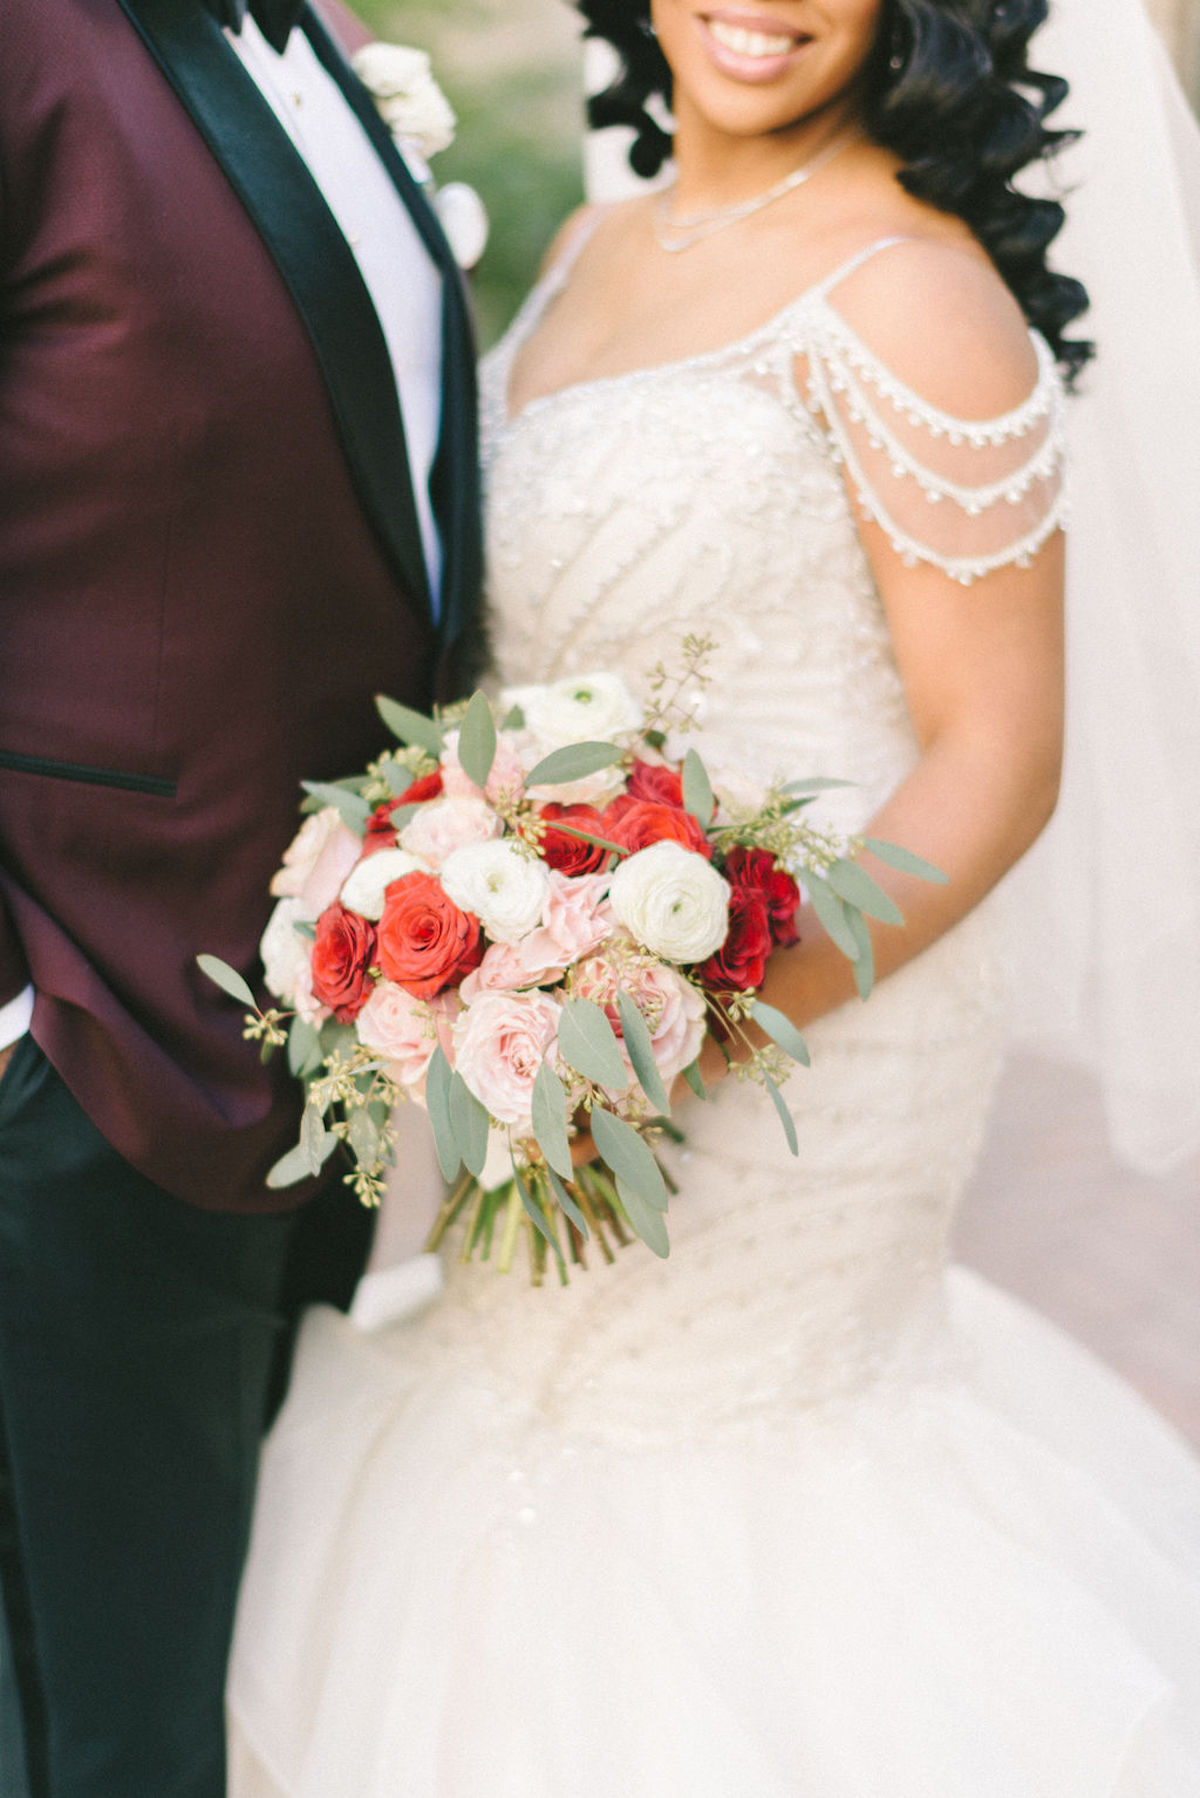 Classic wedding bouquet with red flowers - Elizabeth Fogarty Photography